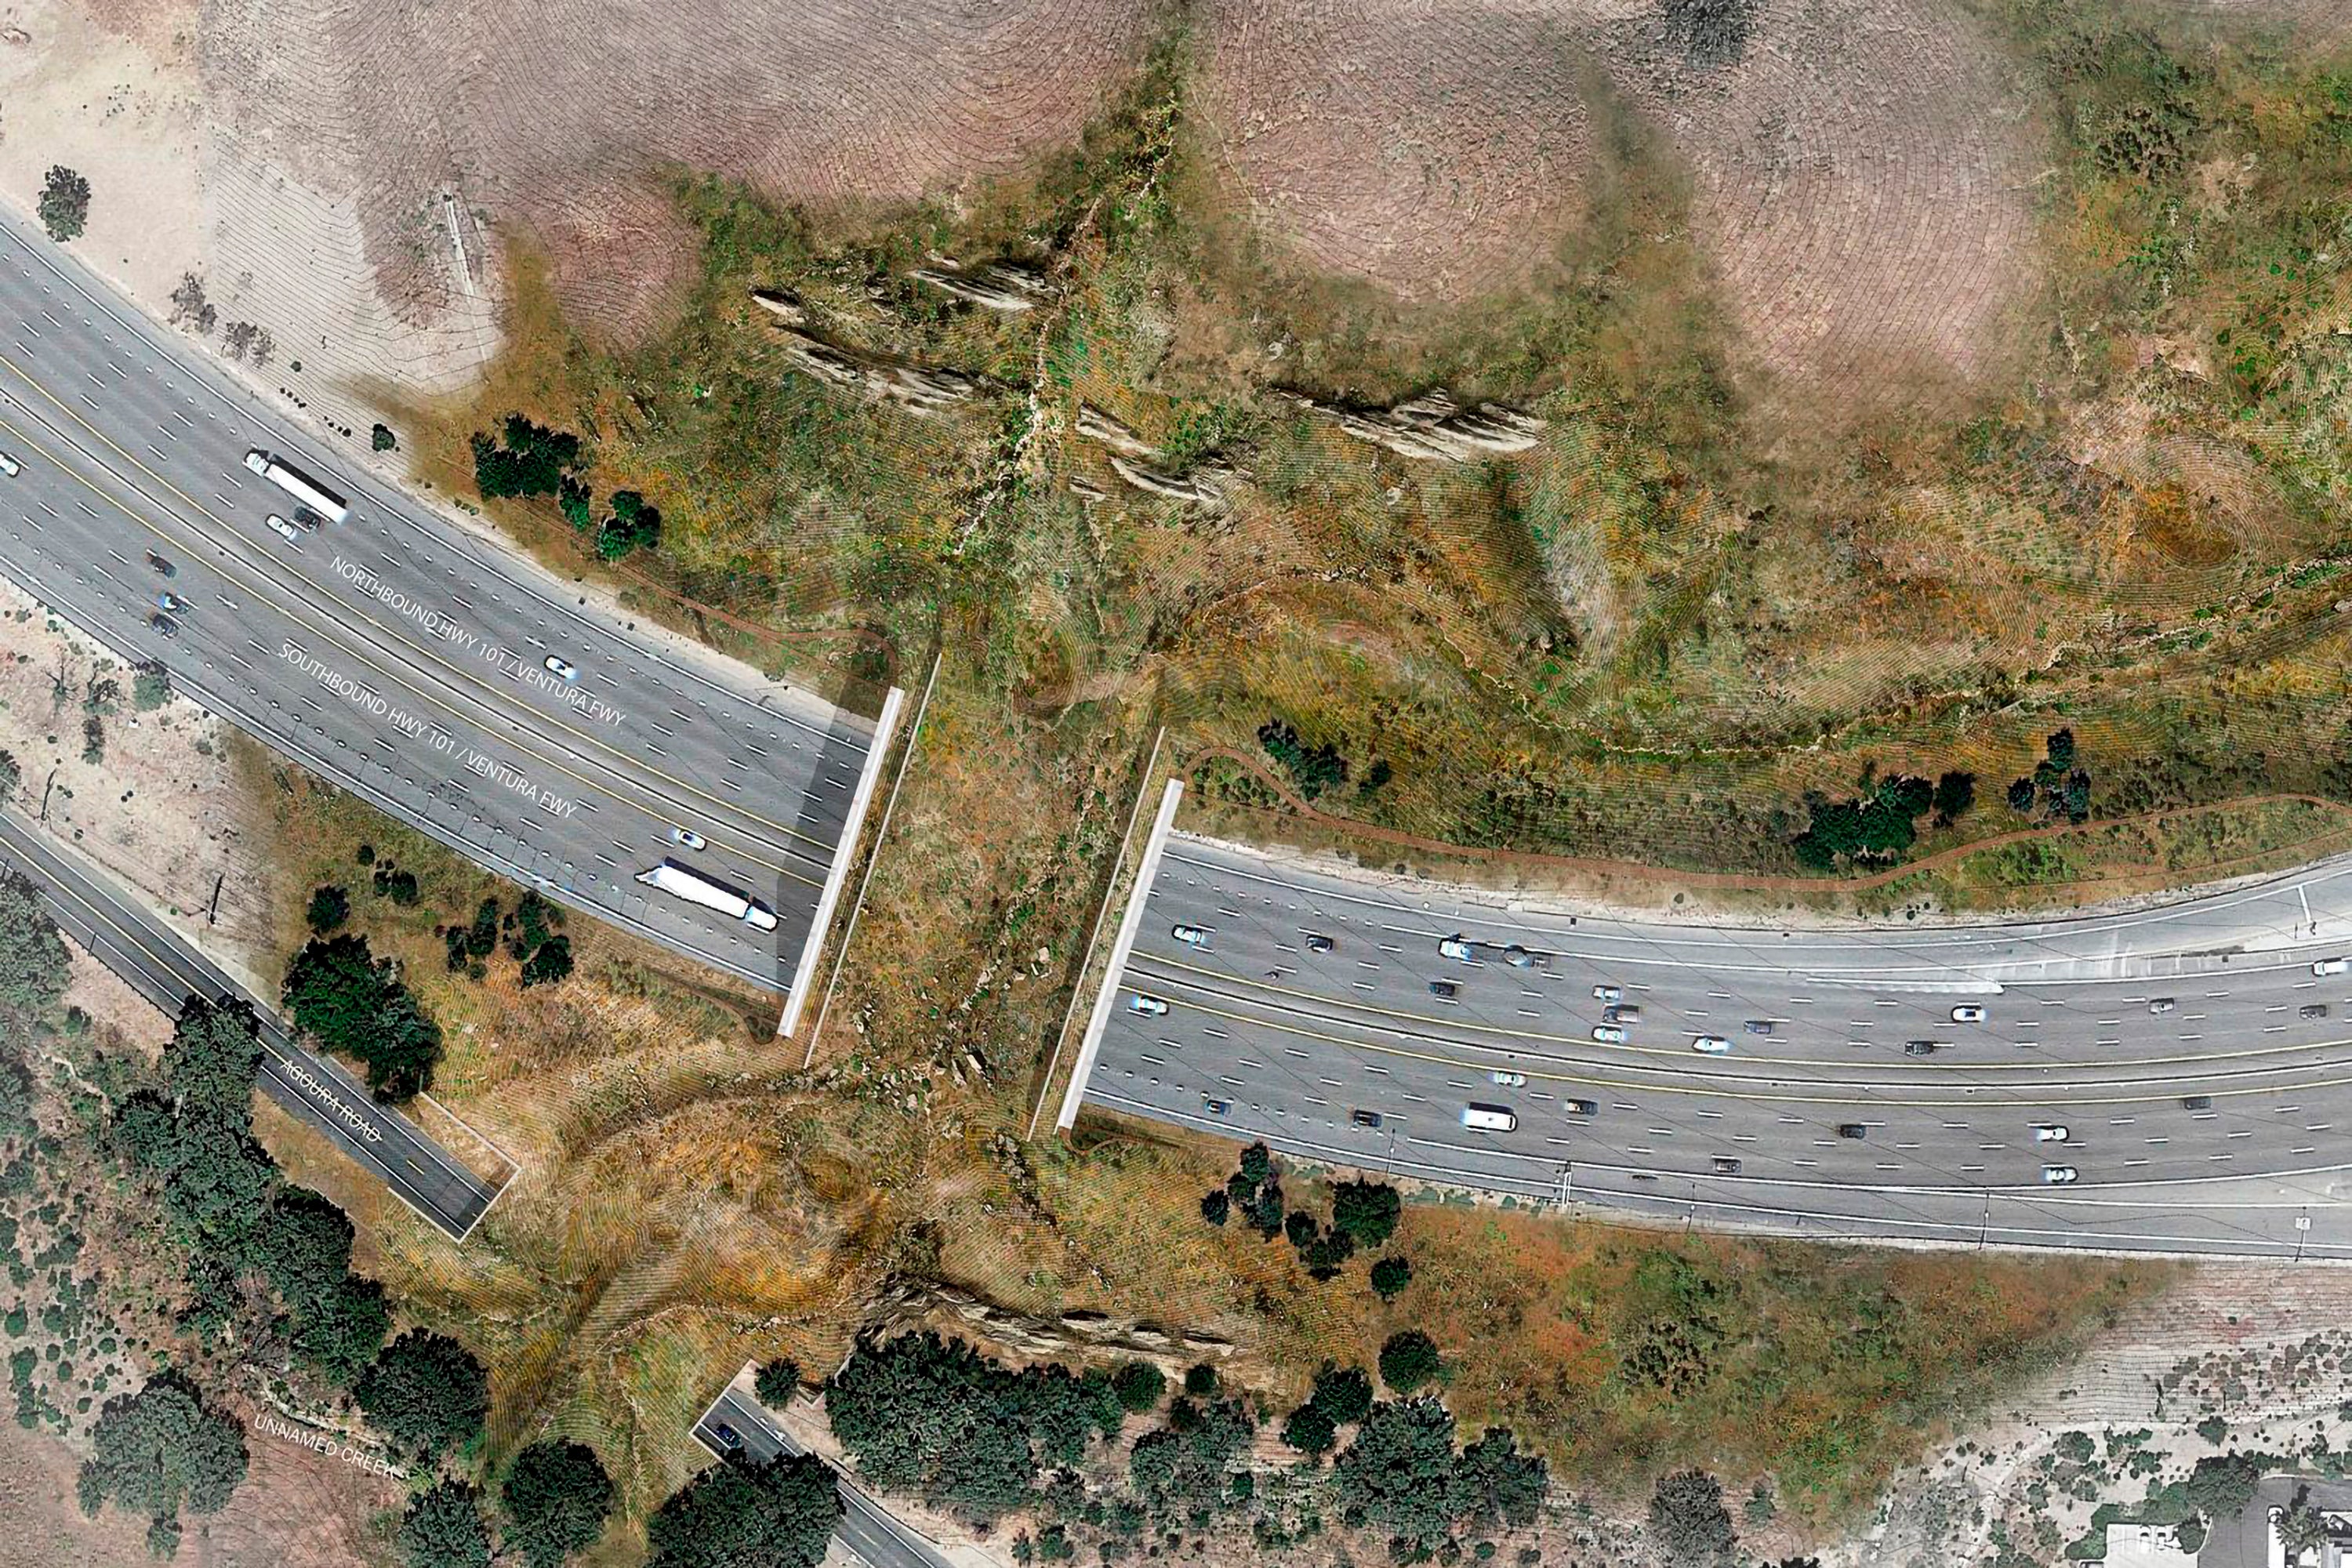 An illustration of the wildlife bridge crossing over US Highway 101 between two separate open space preserves on conservancy lands in the Santa Monica Mountains in Agoura Hills, California